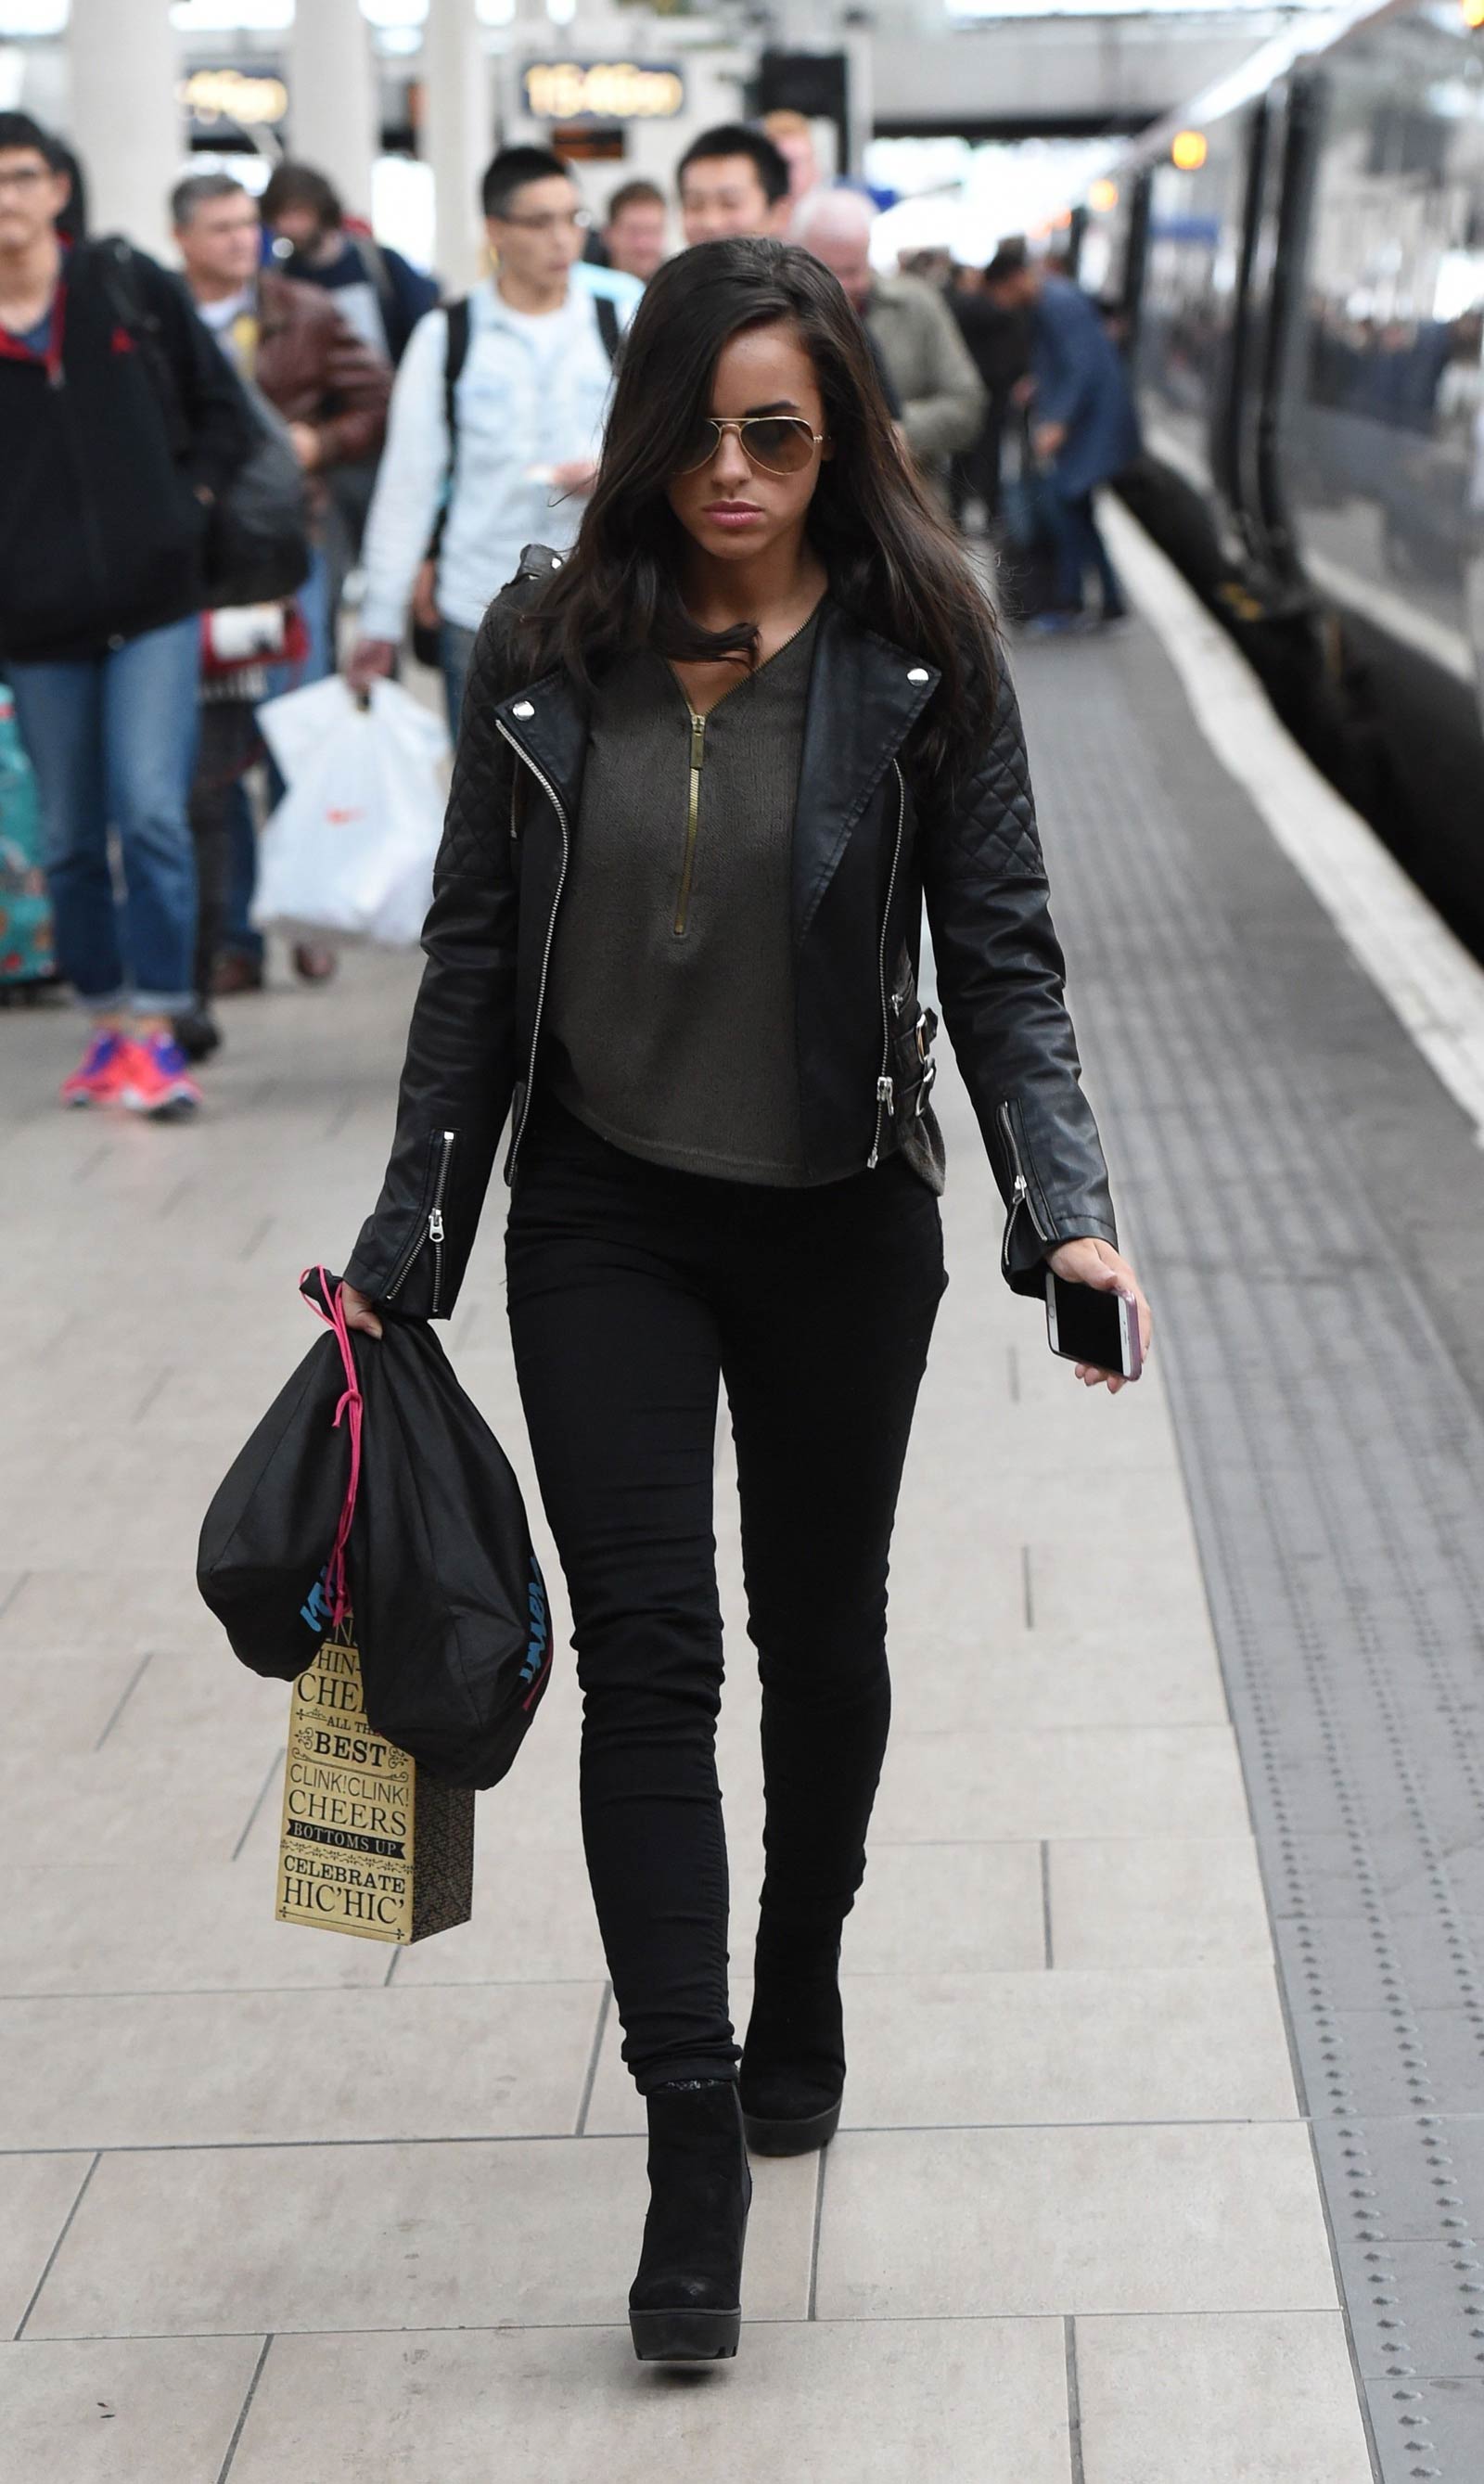 Georgia May Foote in Manchester